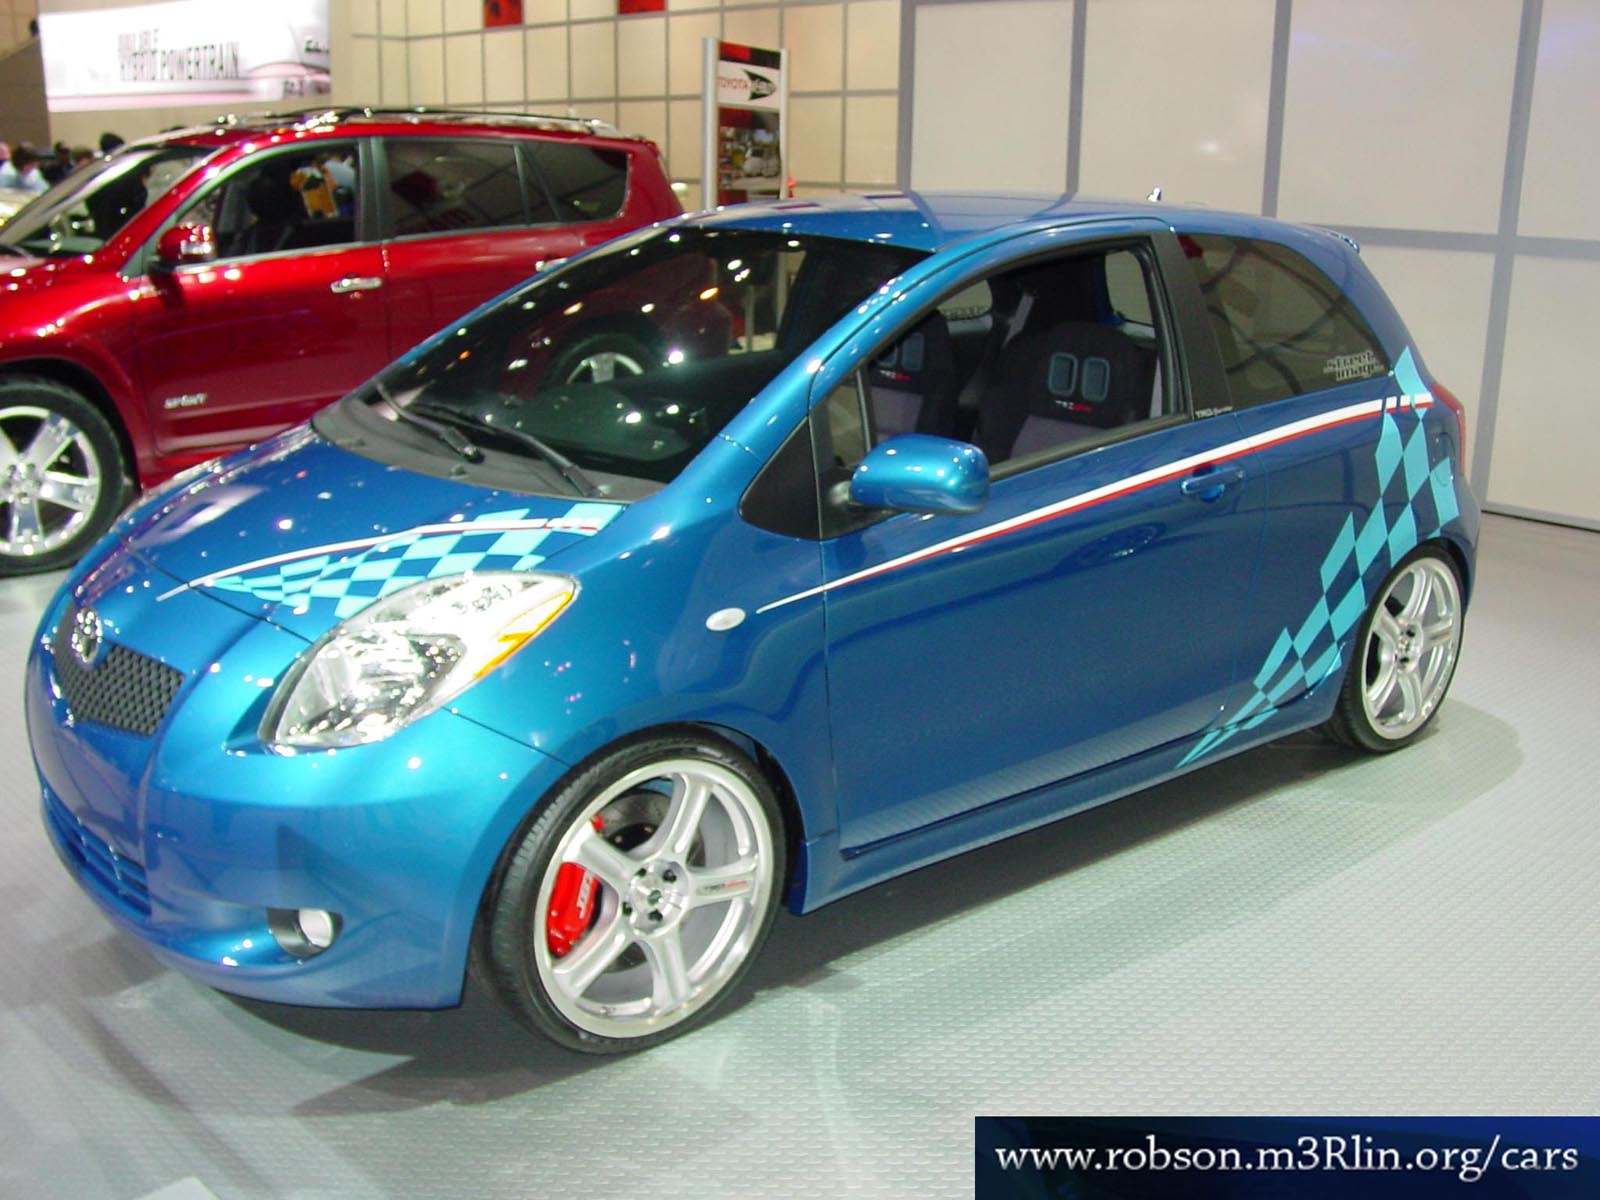 Toyota Yaris Sport. View Download Wallpaper. 1600x1200. Comments